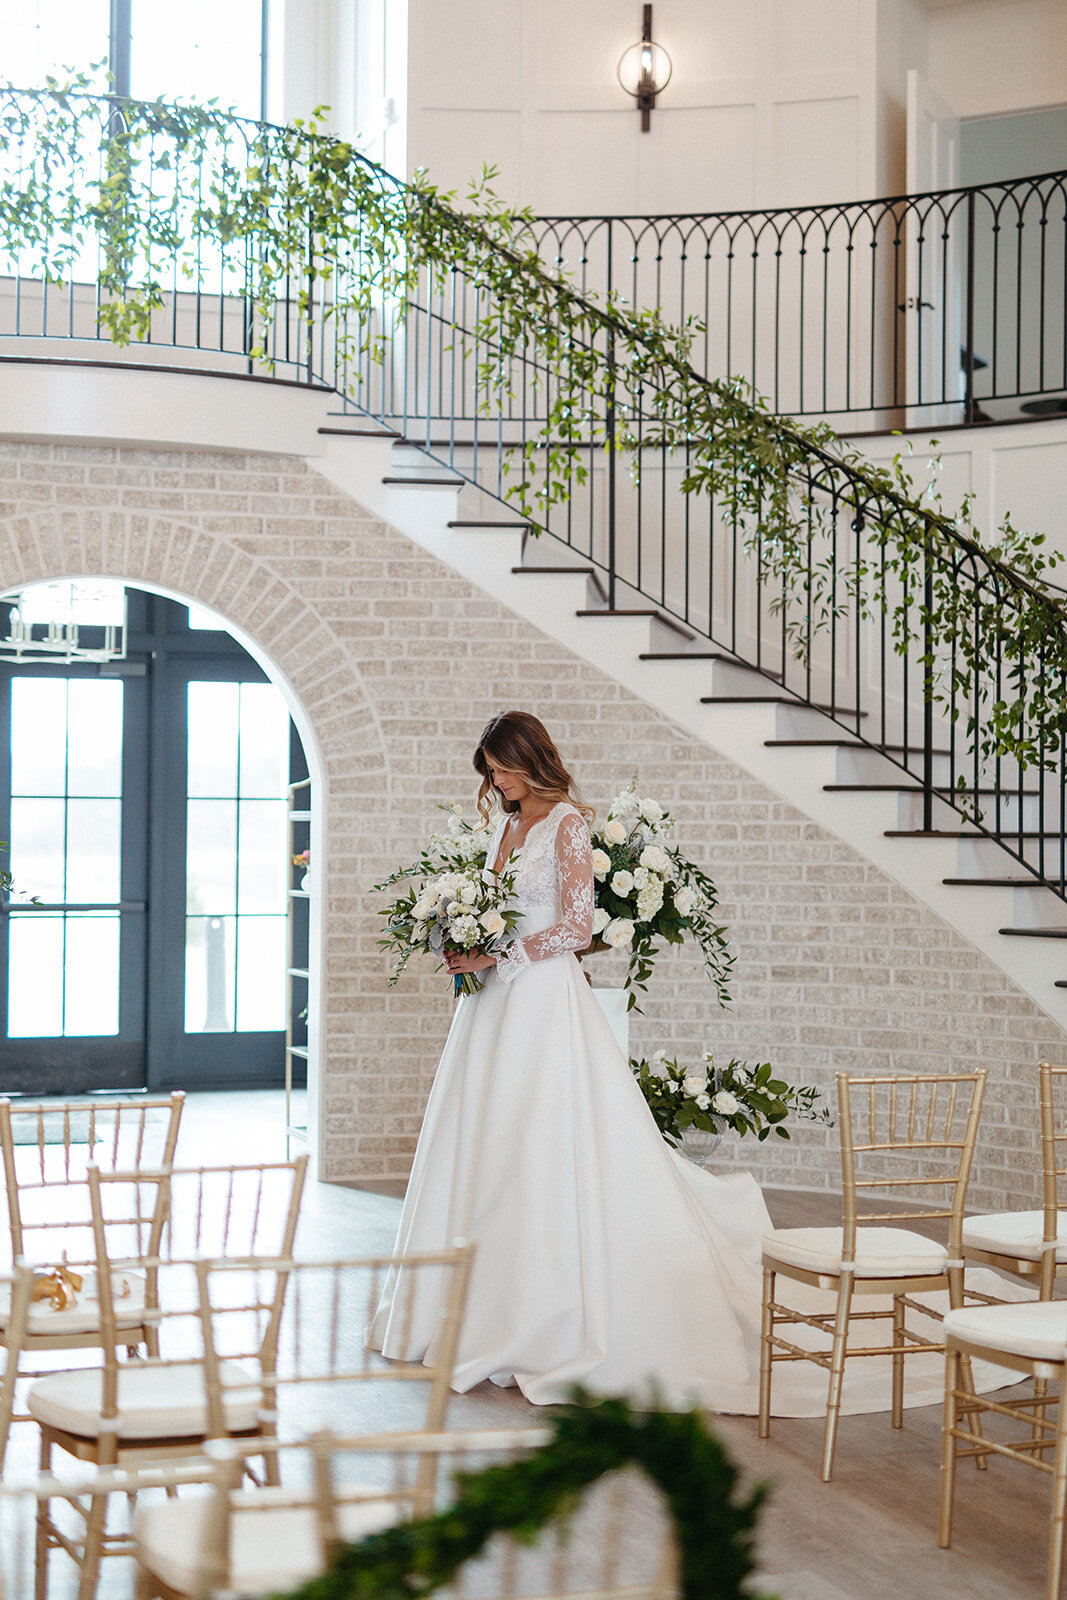 Bride in a white wedding gown holds a bouquet while waiting at the altar in front a staircase wrapped in garland.